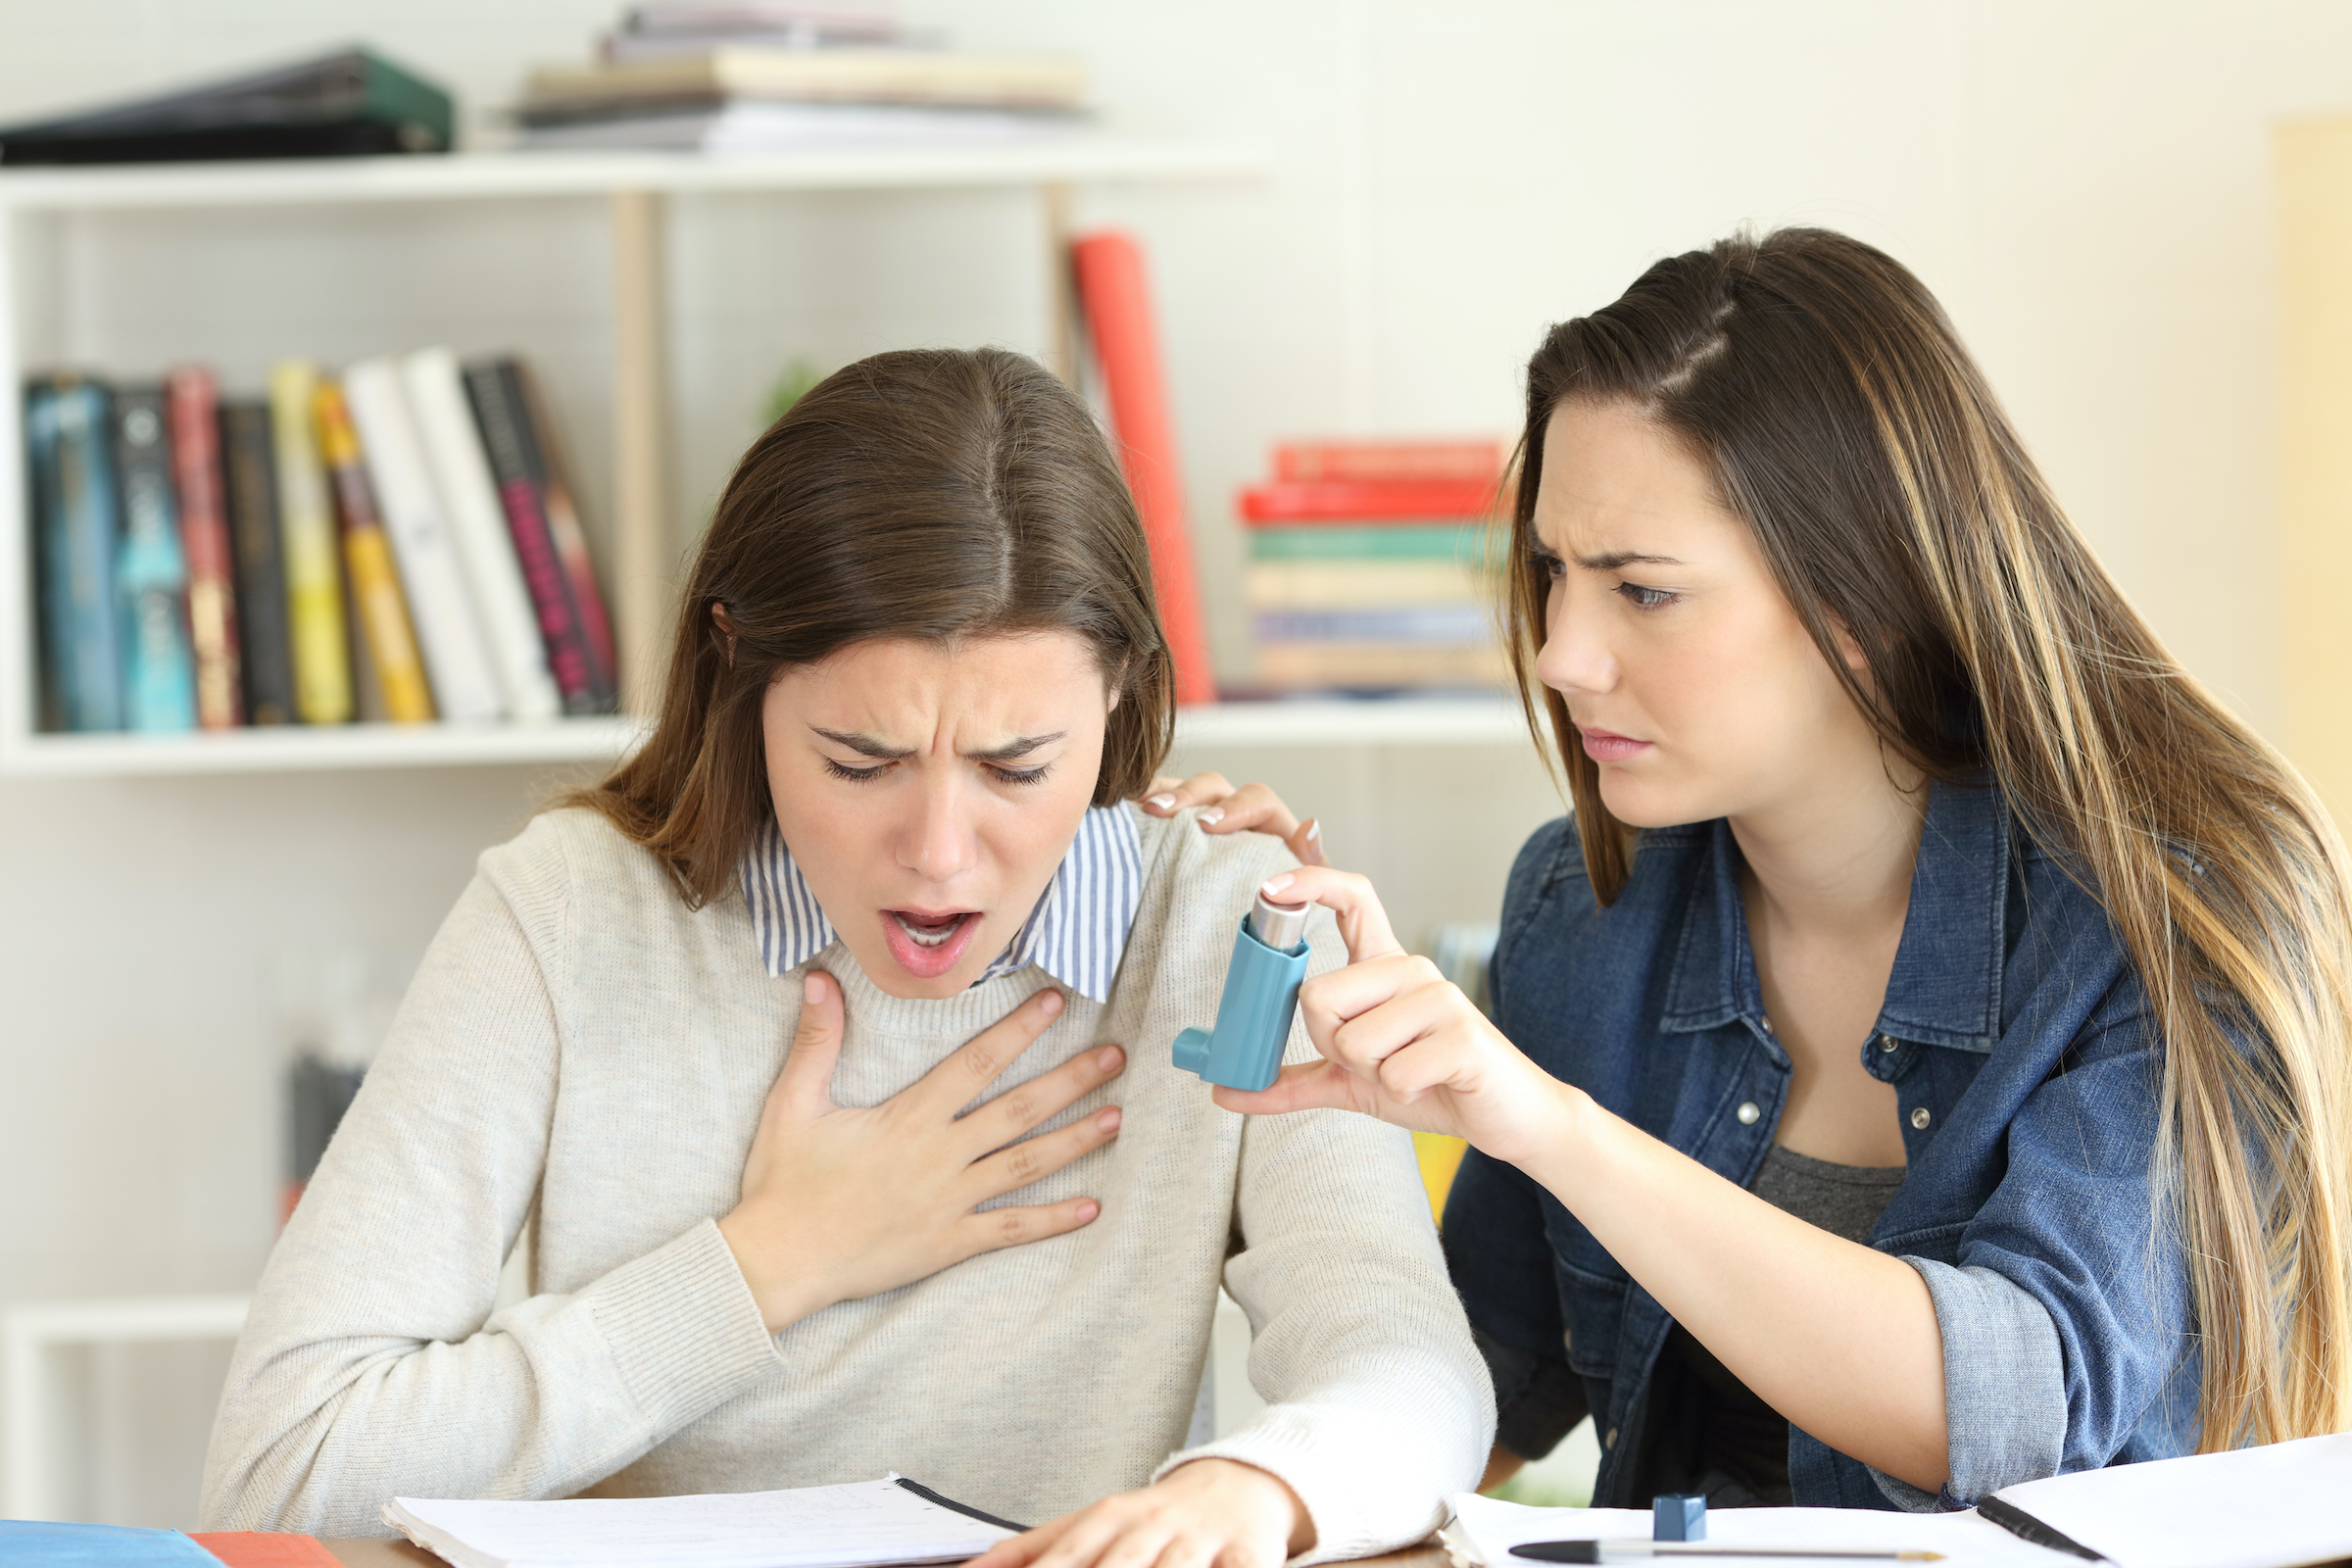 What are the Symptoms of Asthma Attack and the Treatment for Asthma Attack?